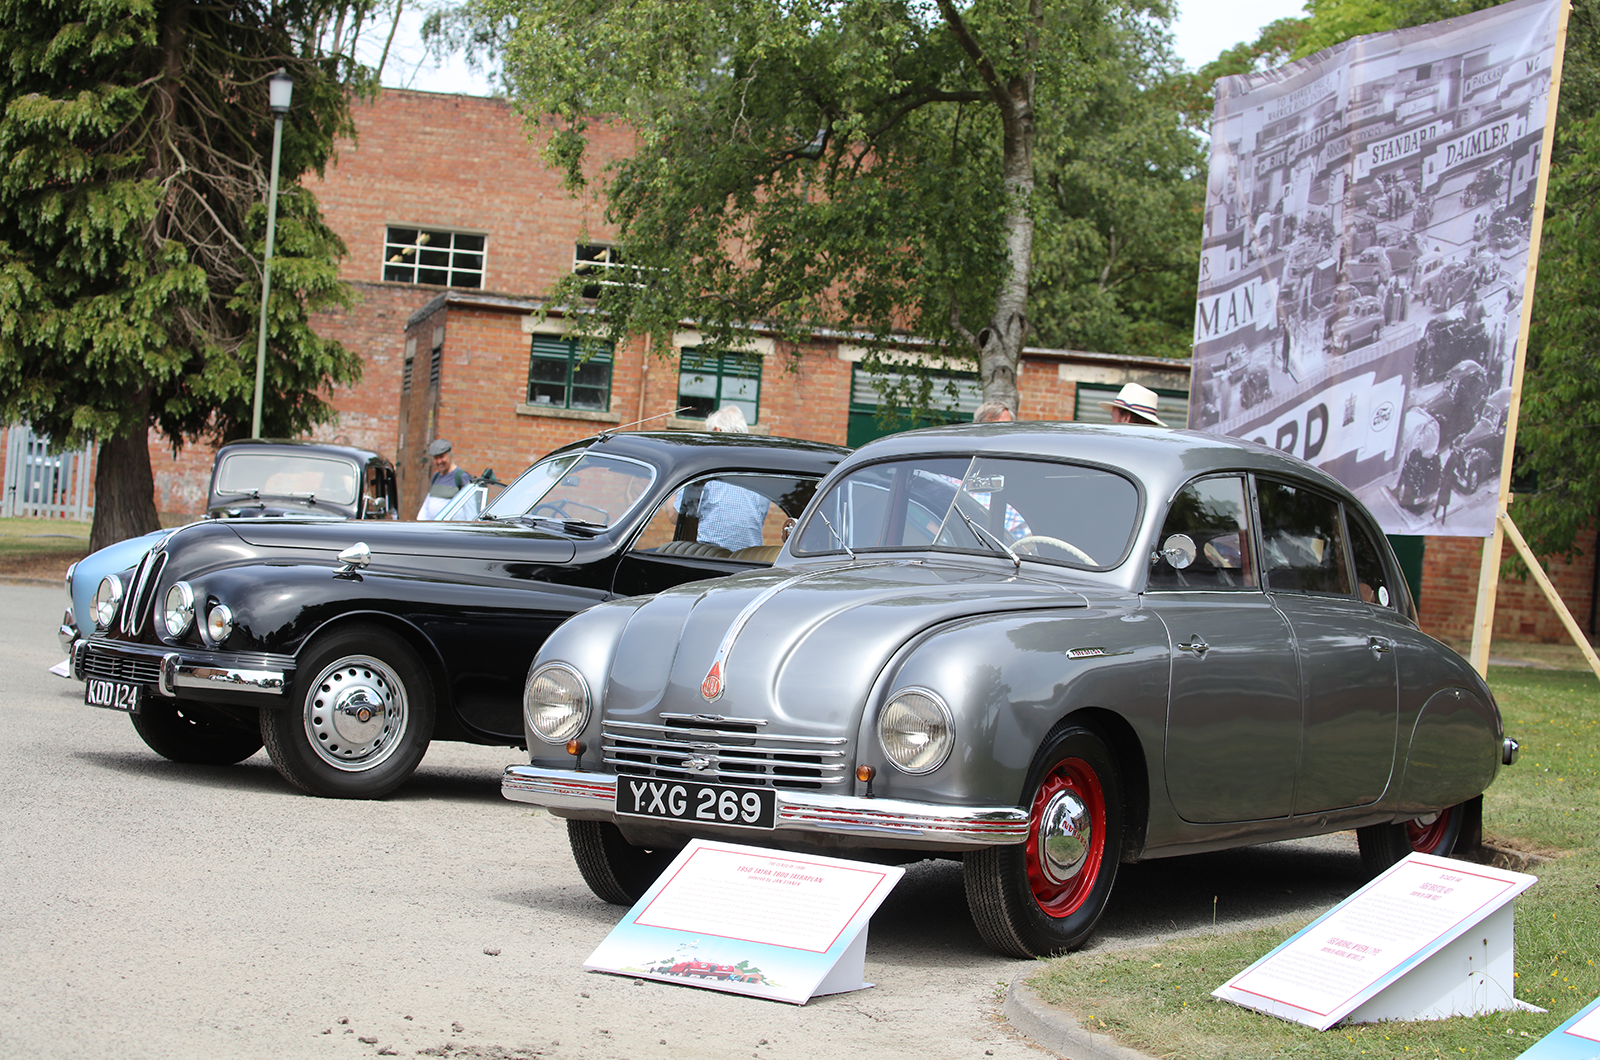 The sun shines on The Classic & Sports Car Show in association with Flywheel 